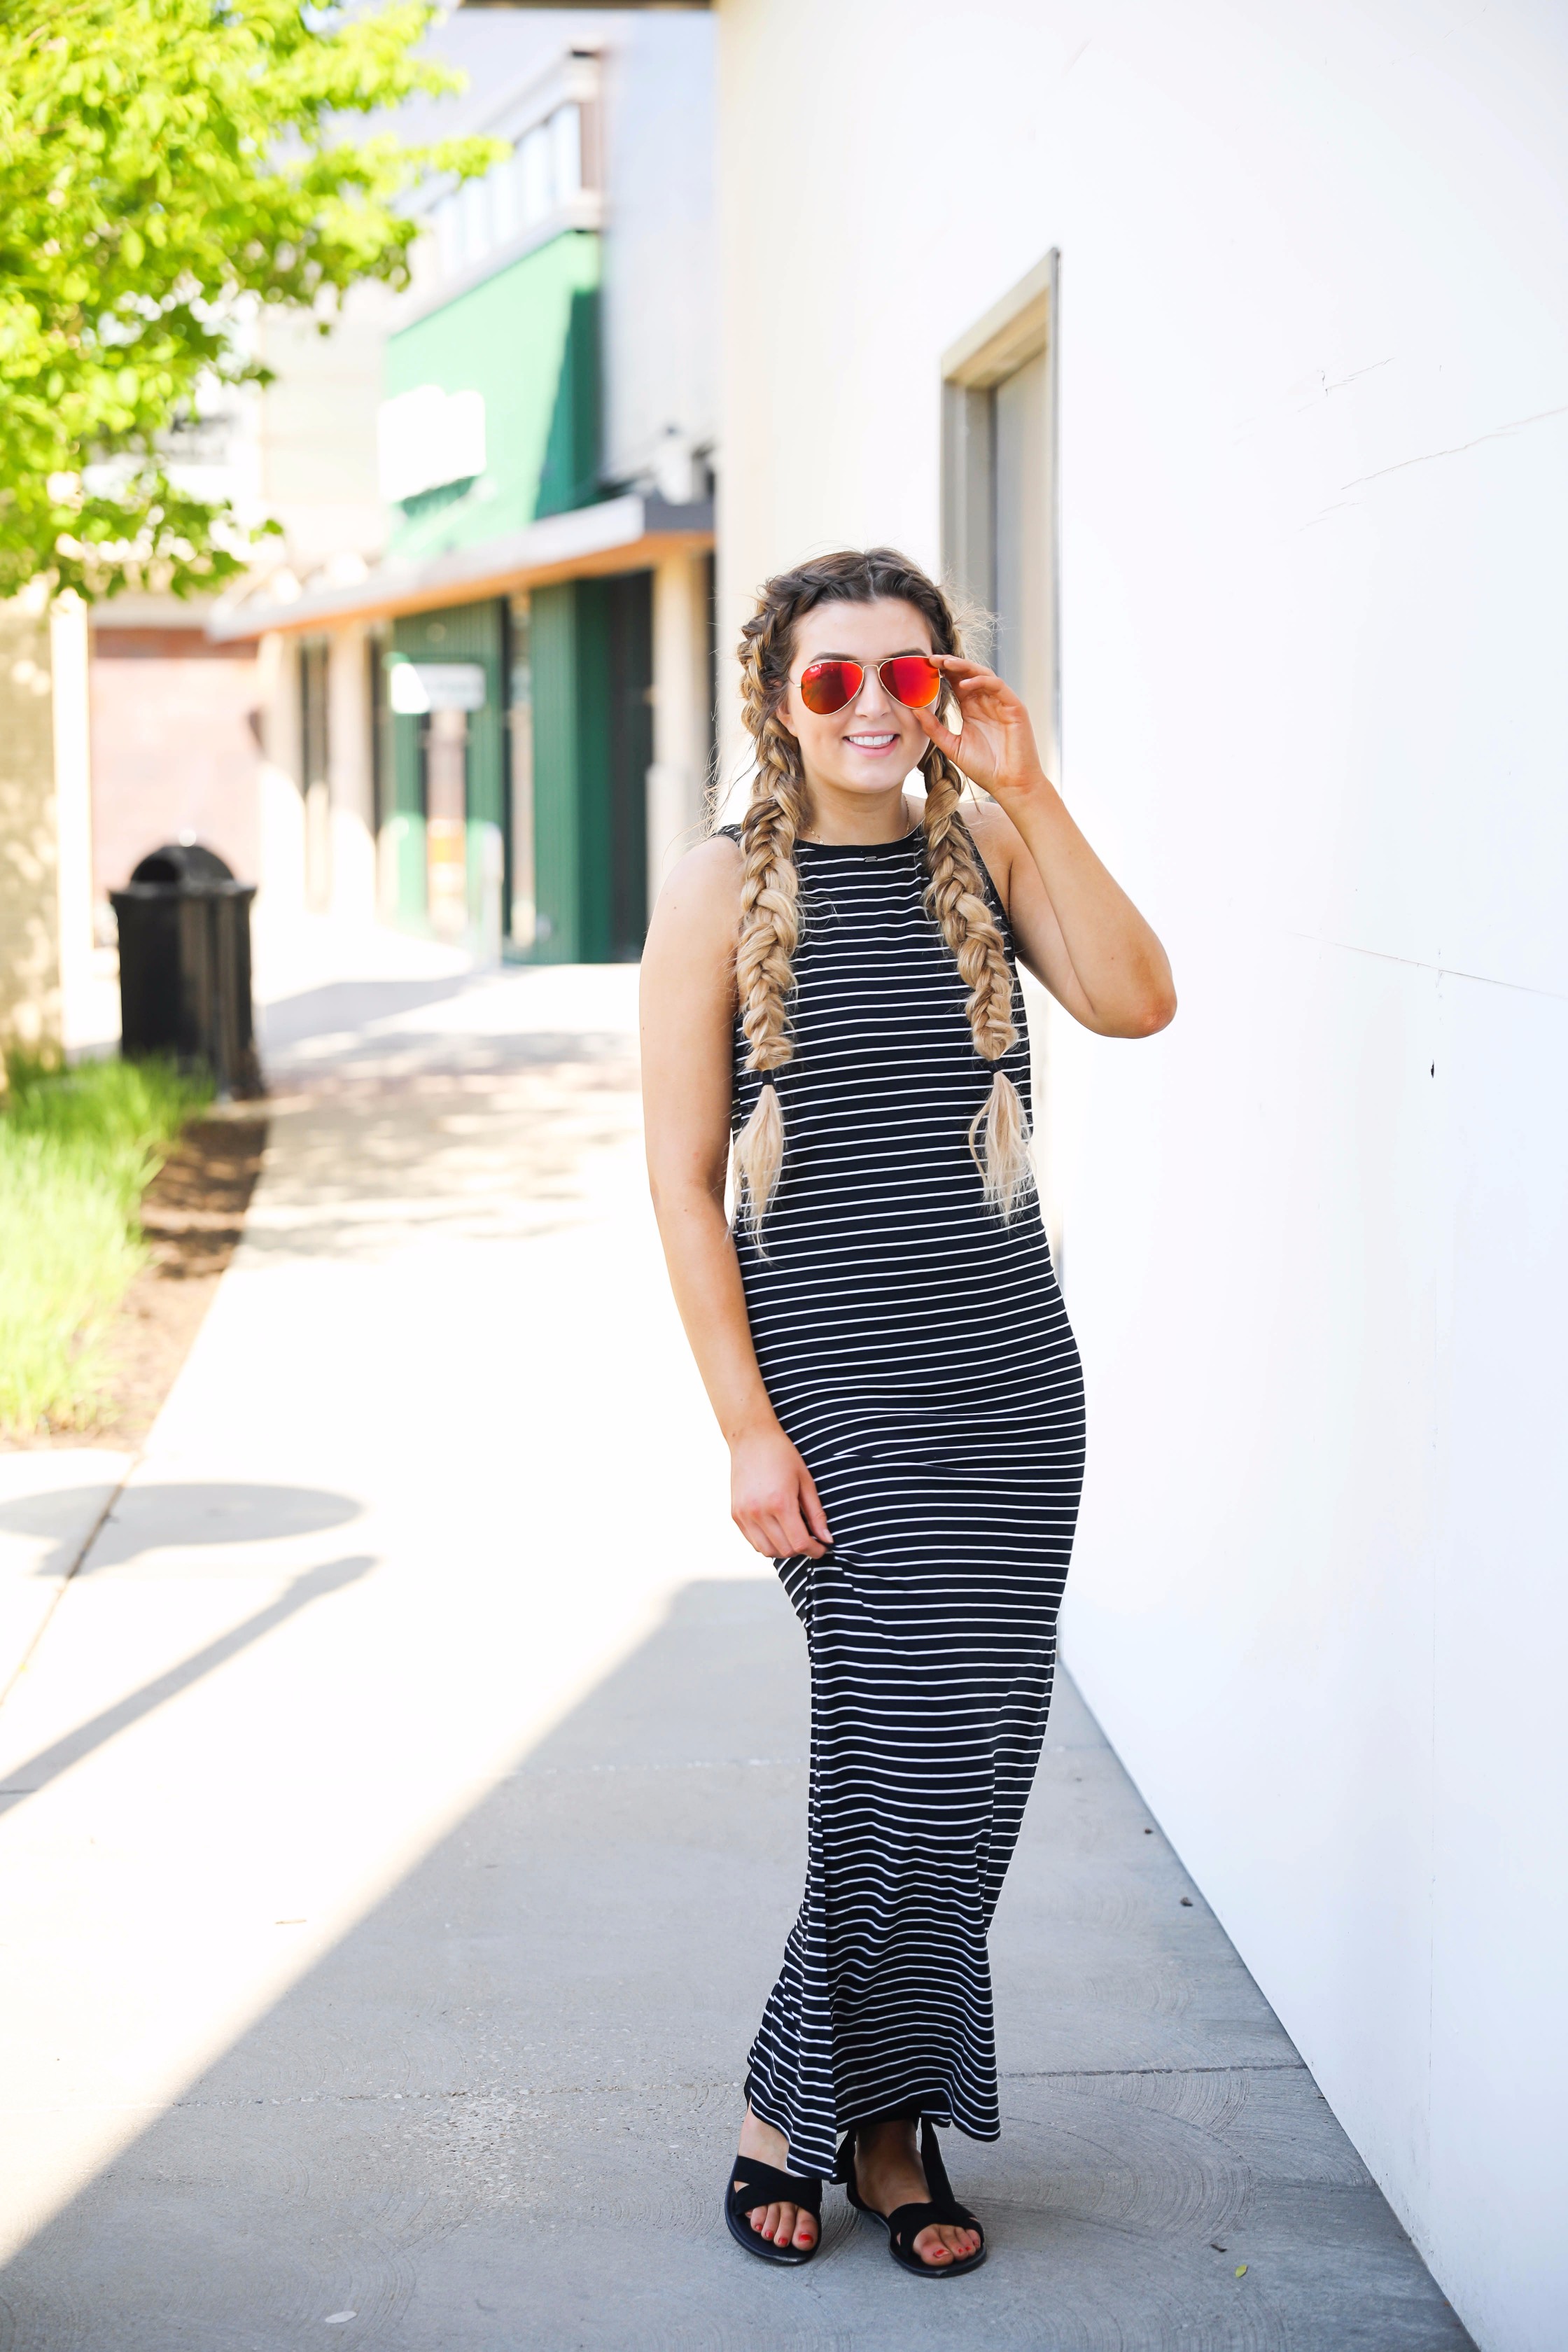 Summer Dresses and Messy Braids  OOTD  Daily Dose of Charm